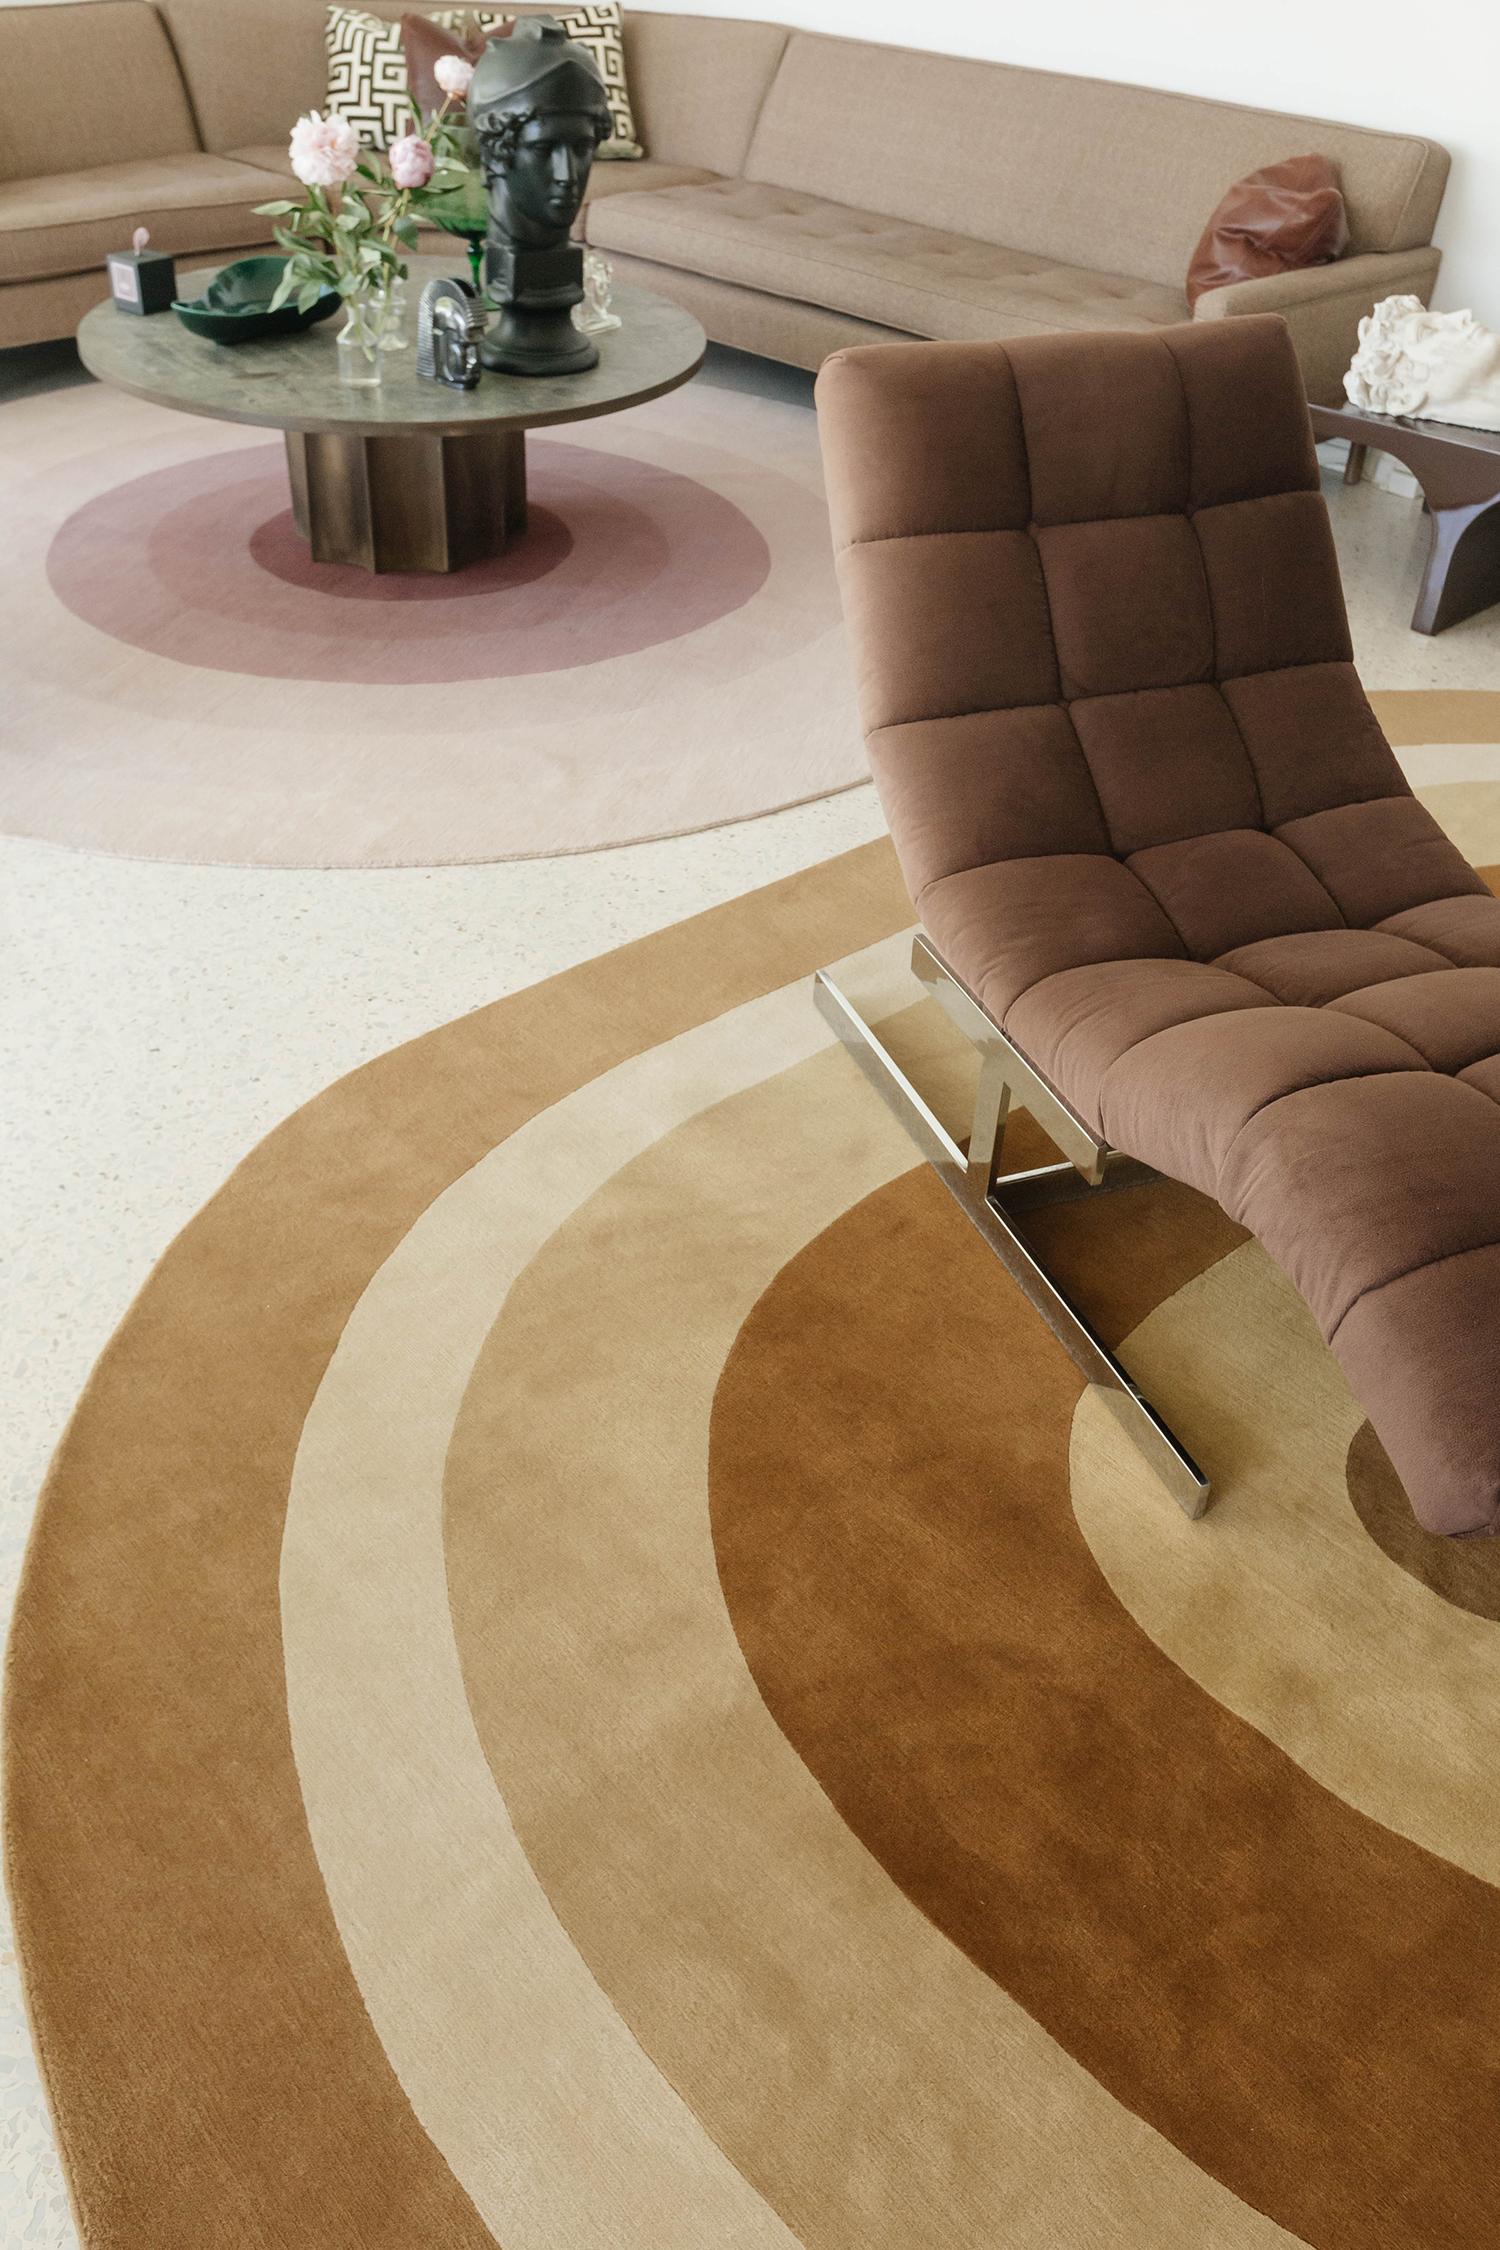 Clarion’ by Michael Berman features a direct approach to the rug’s viewer by visualizing a series of neutral colours and flow in its oval pattern. Rendered in the stunning shades of caramel, ivory and tortilla, this rug will definitely bring out a